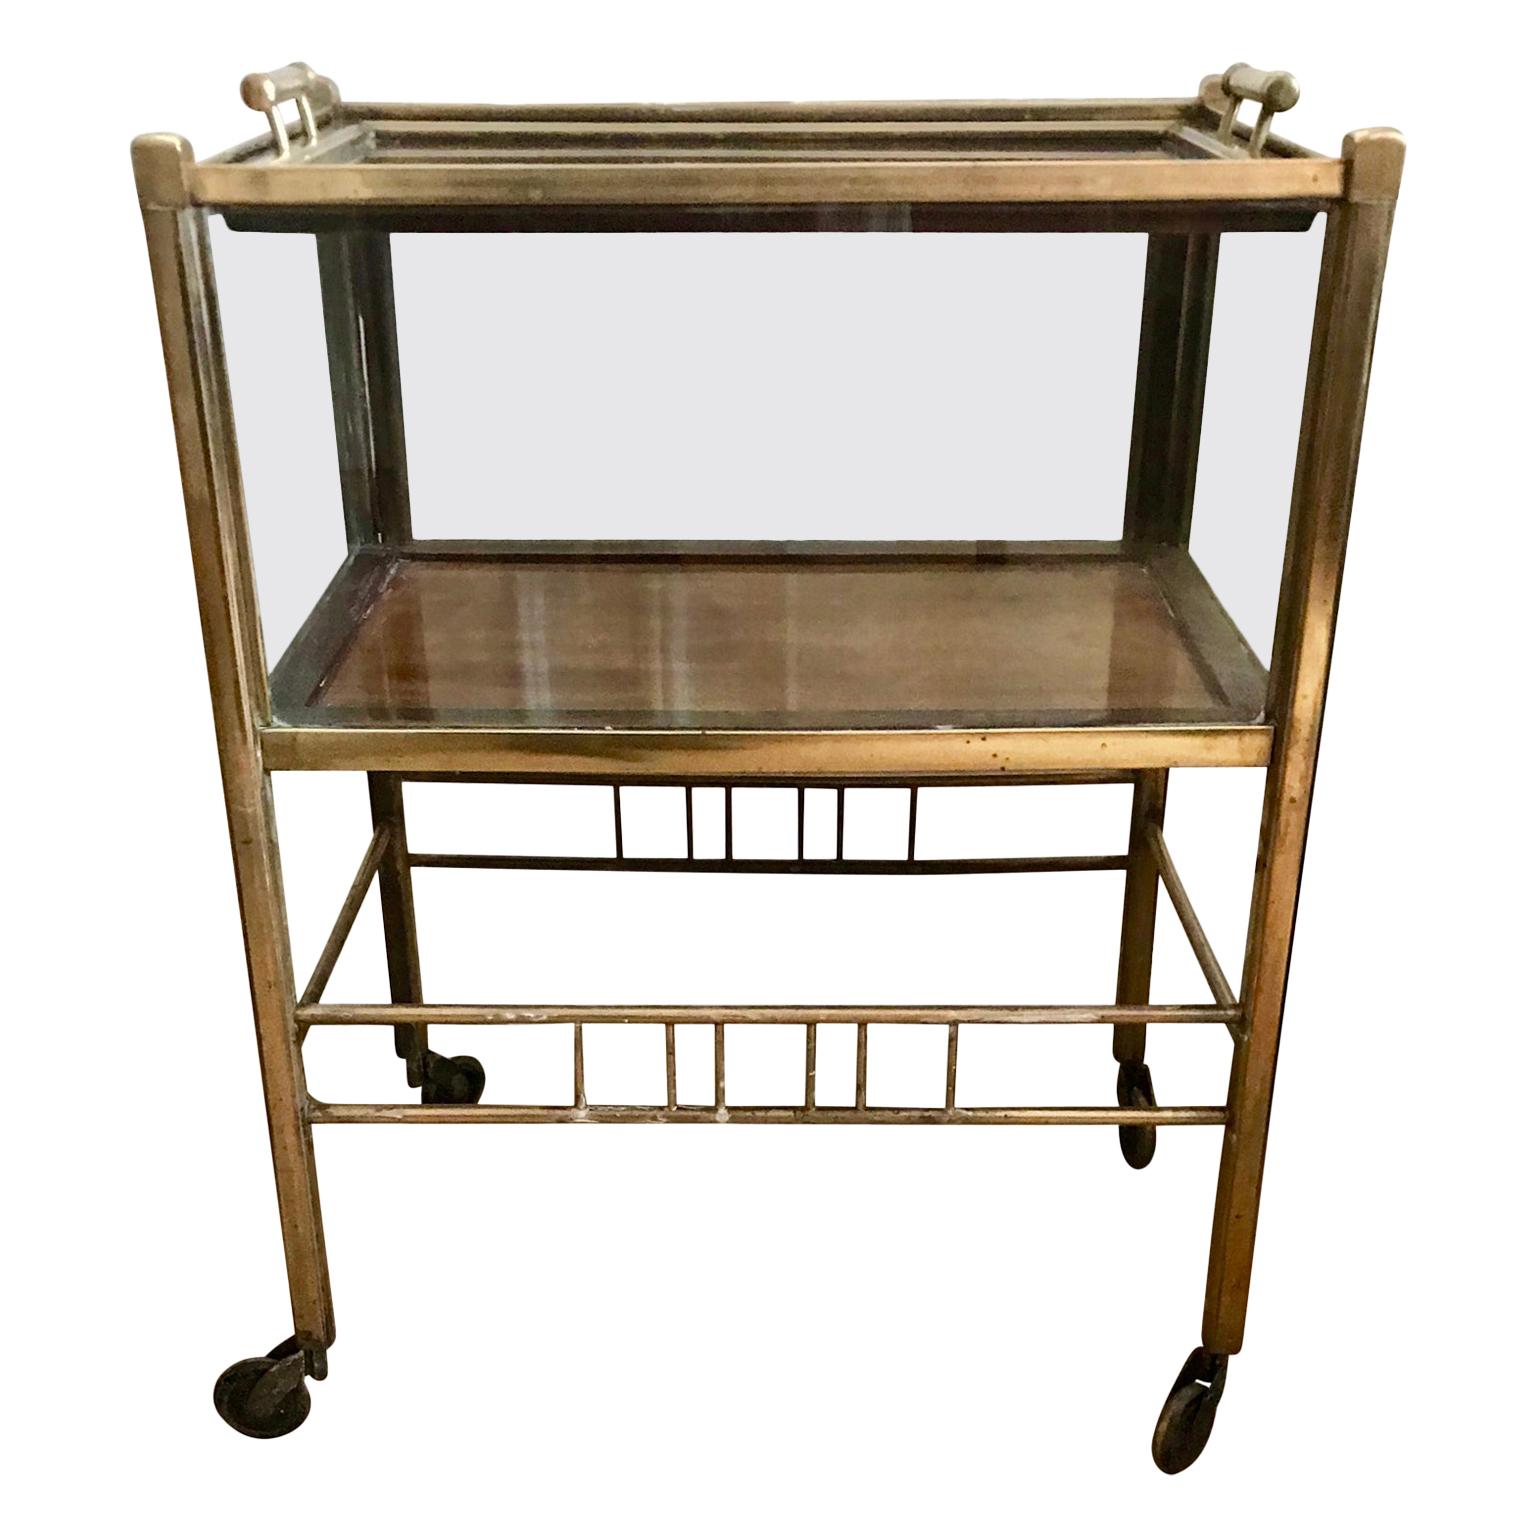 Art Deco Brass And Wood Bar Cart Trolley By Ernst Rockhausen, Germany, 1920s